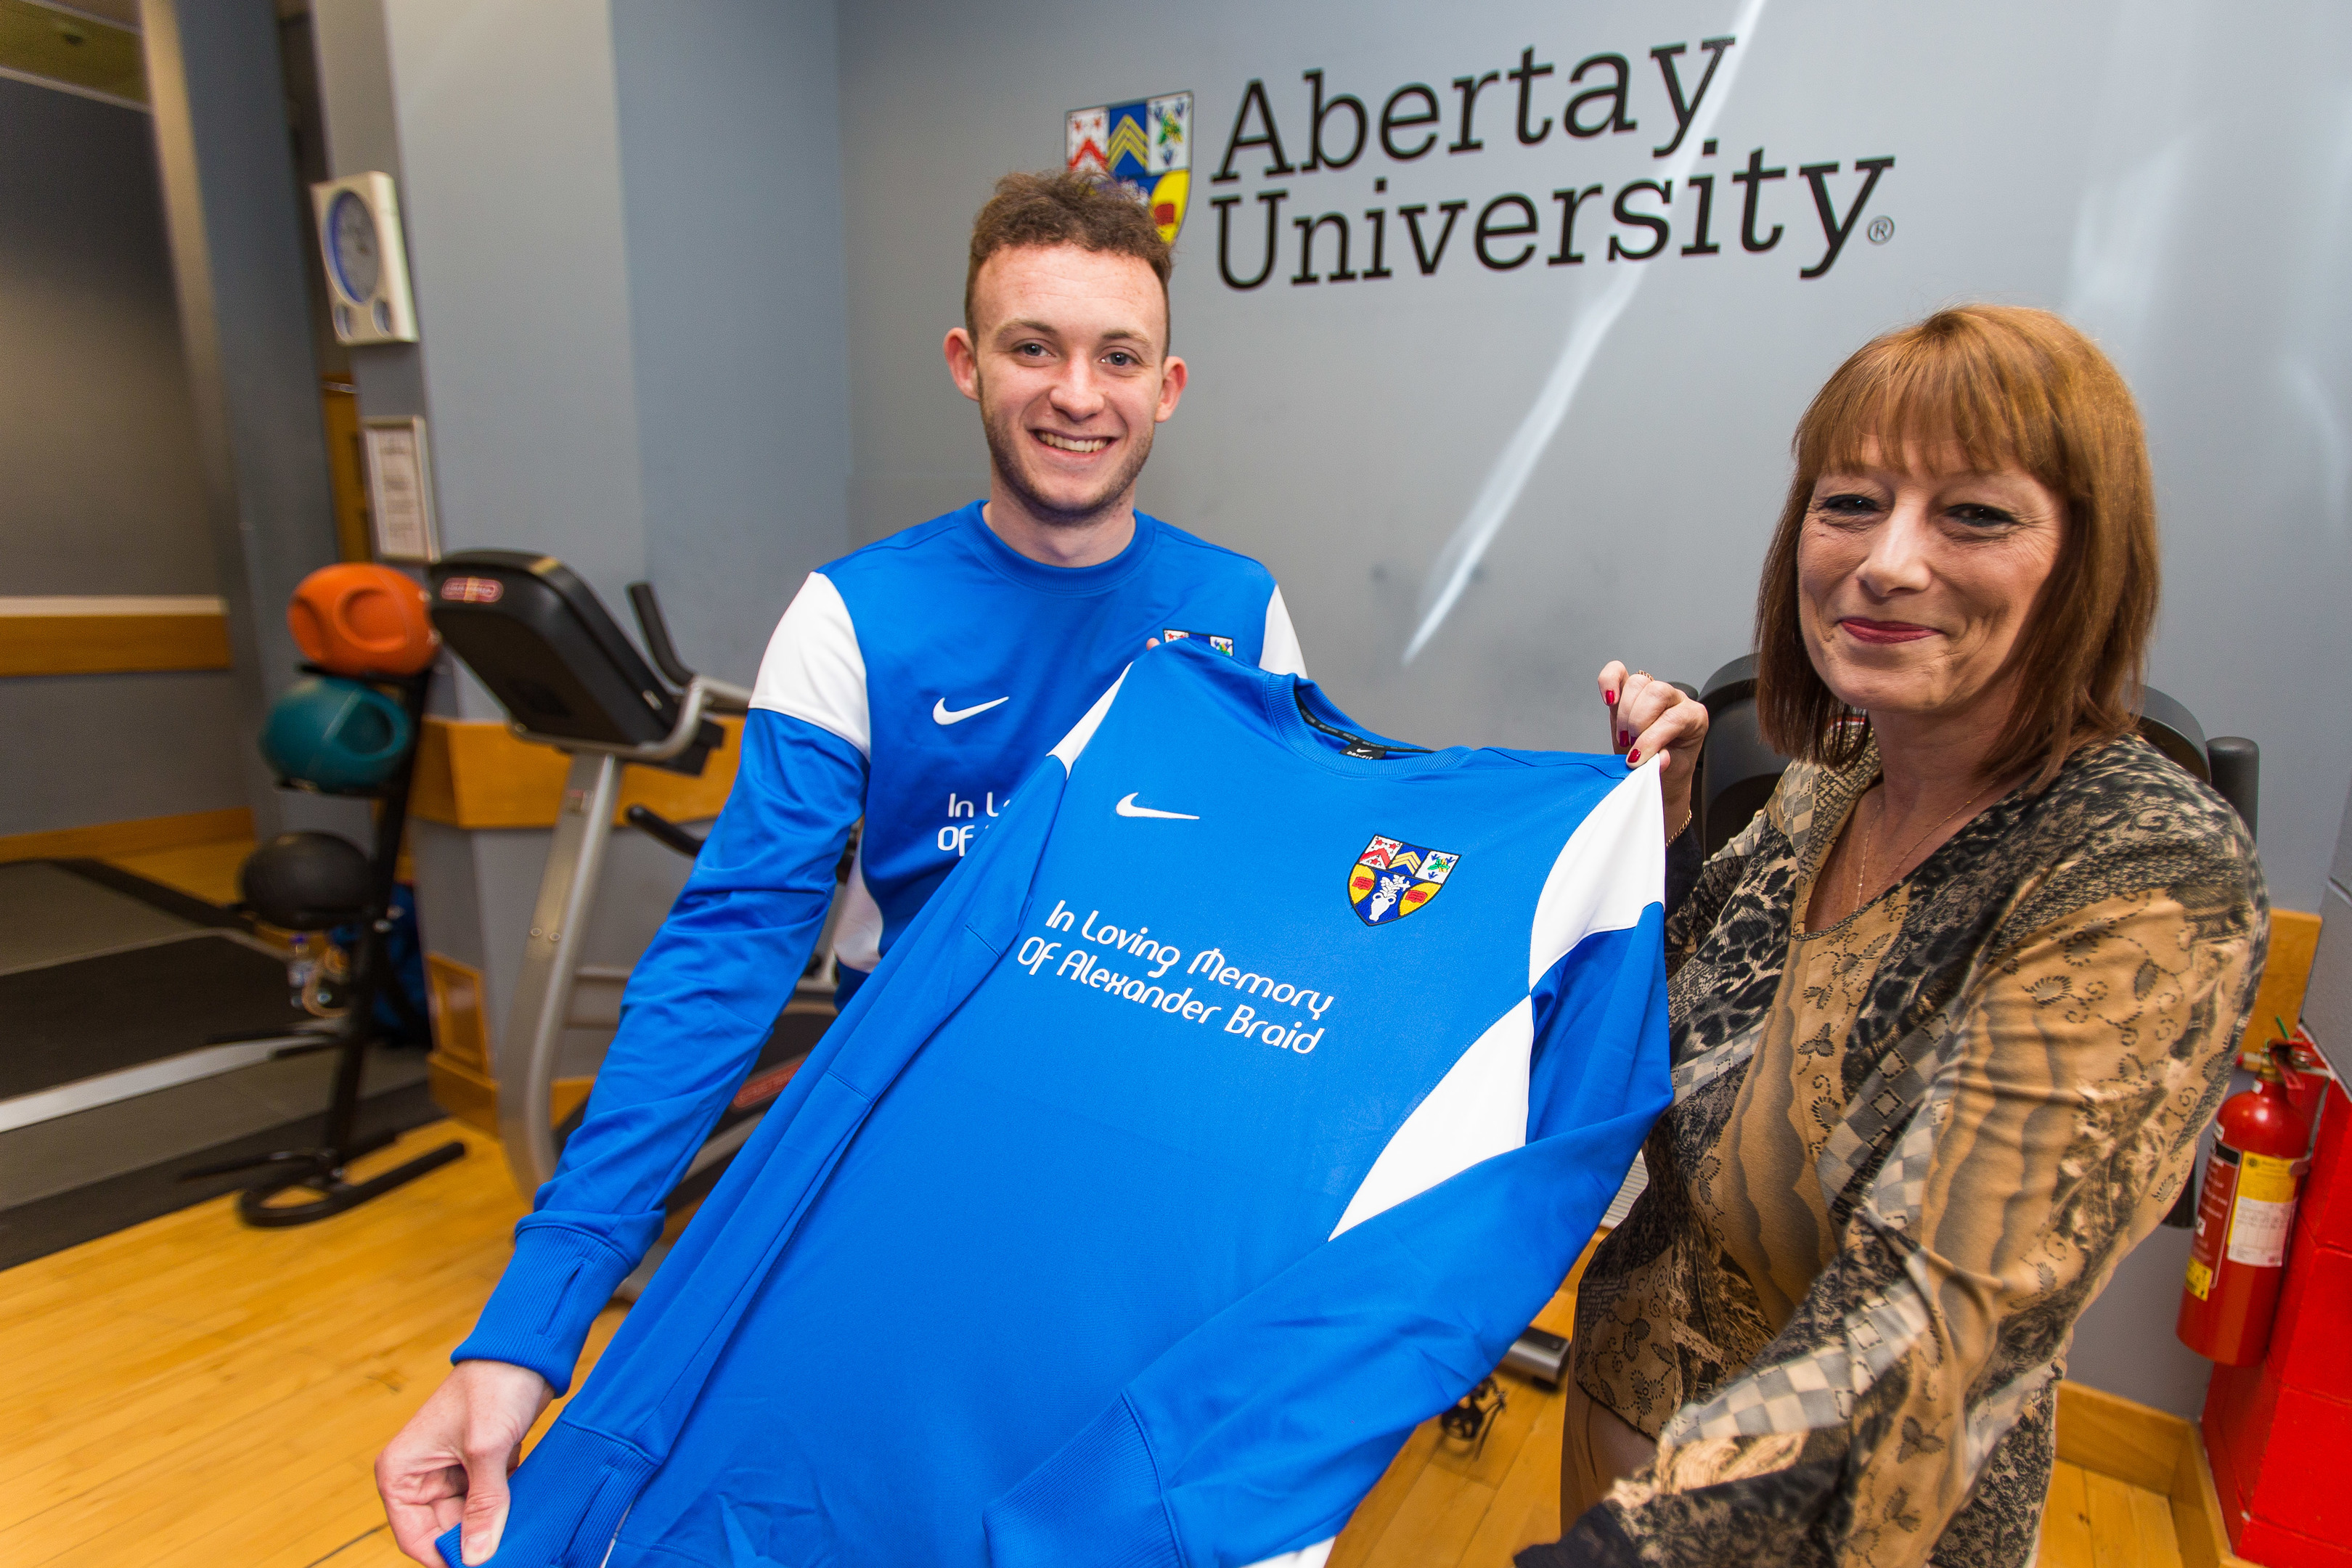 Linda and Adam with one of the football shirts.